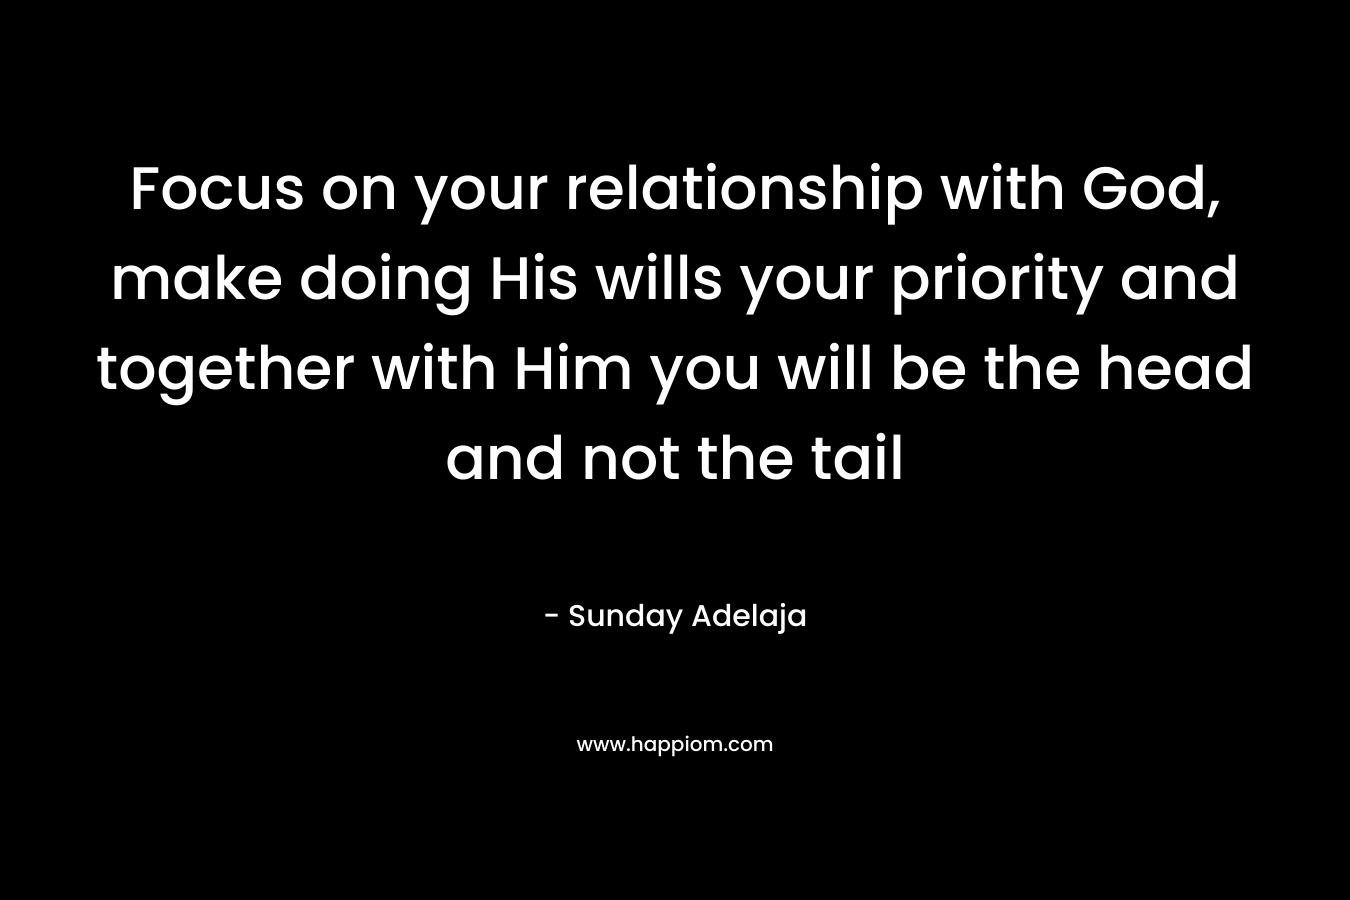 Focus on your relationship with God, make doing His wills your priority and together with Him you will be the head and not the tail – Sunday Adelaja